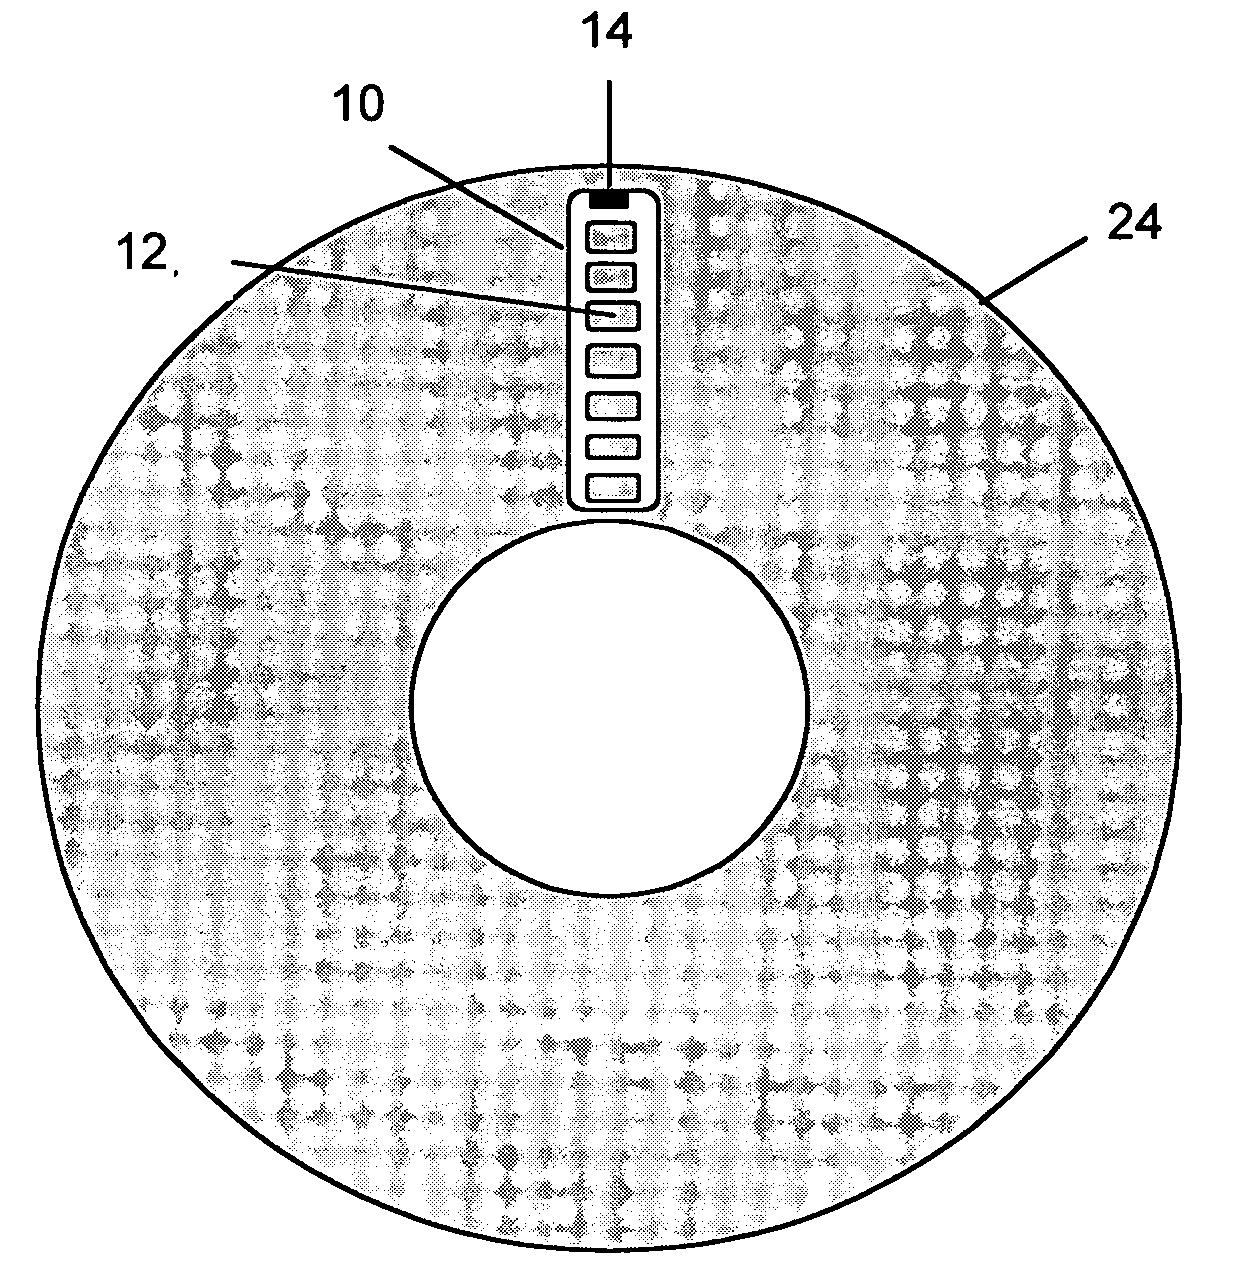 Display method and apparatus